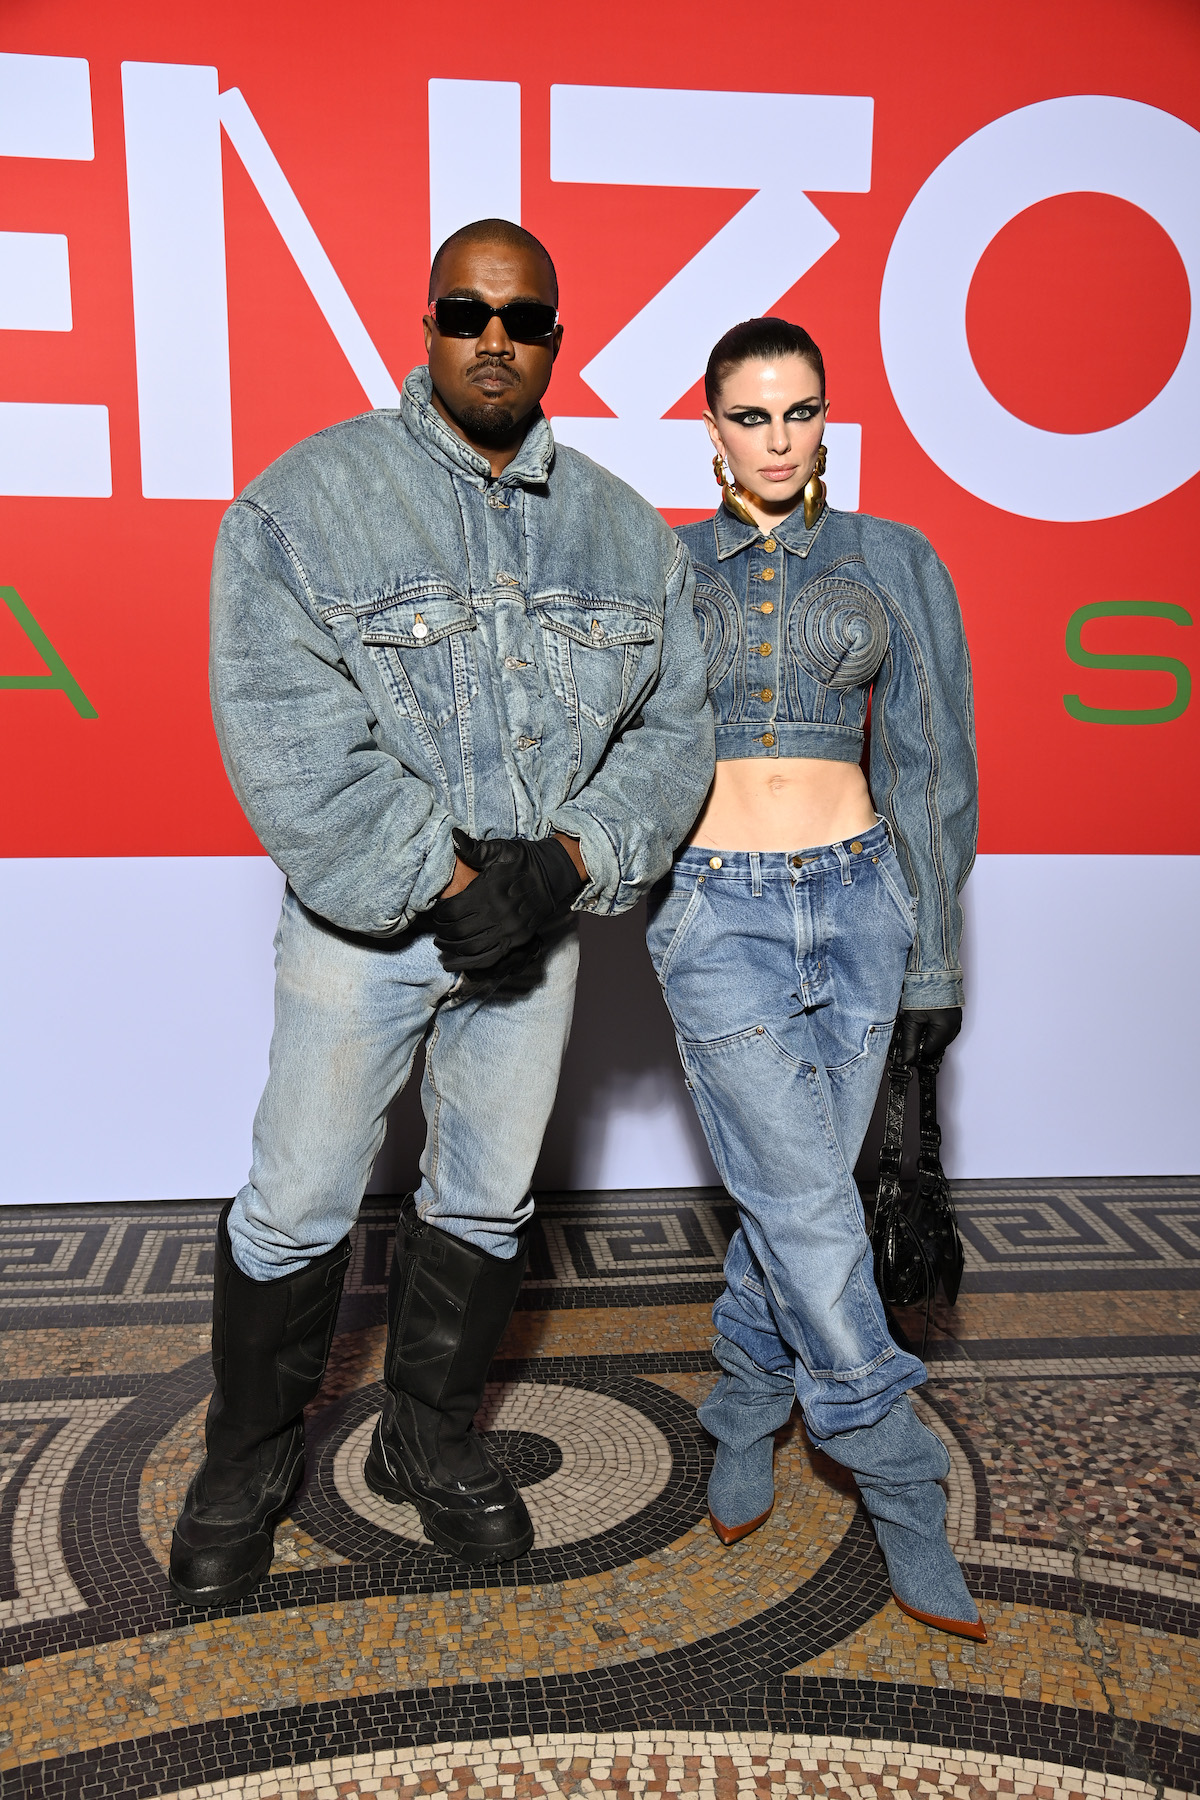 West/Fox (Photo by Pascal Le Segretain/Getty Images For Kenzo)